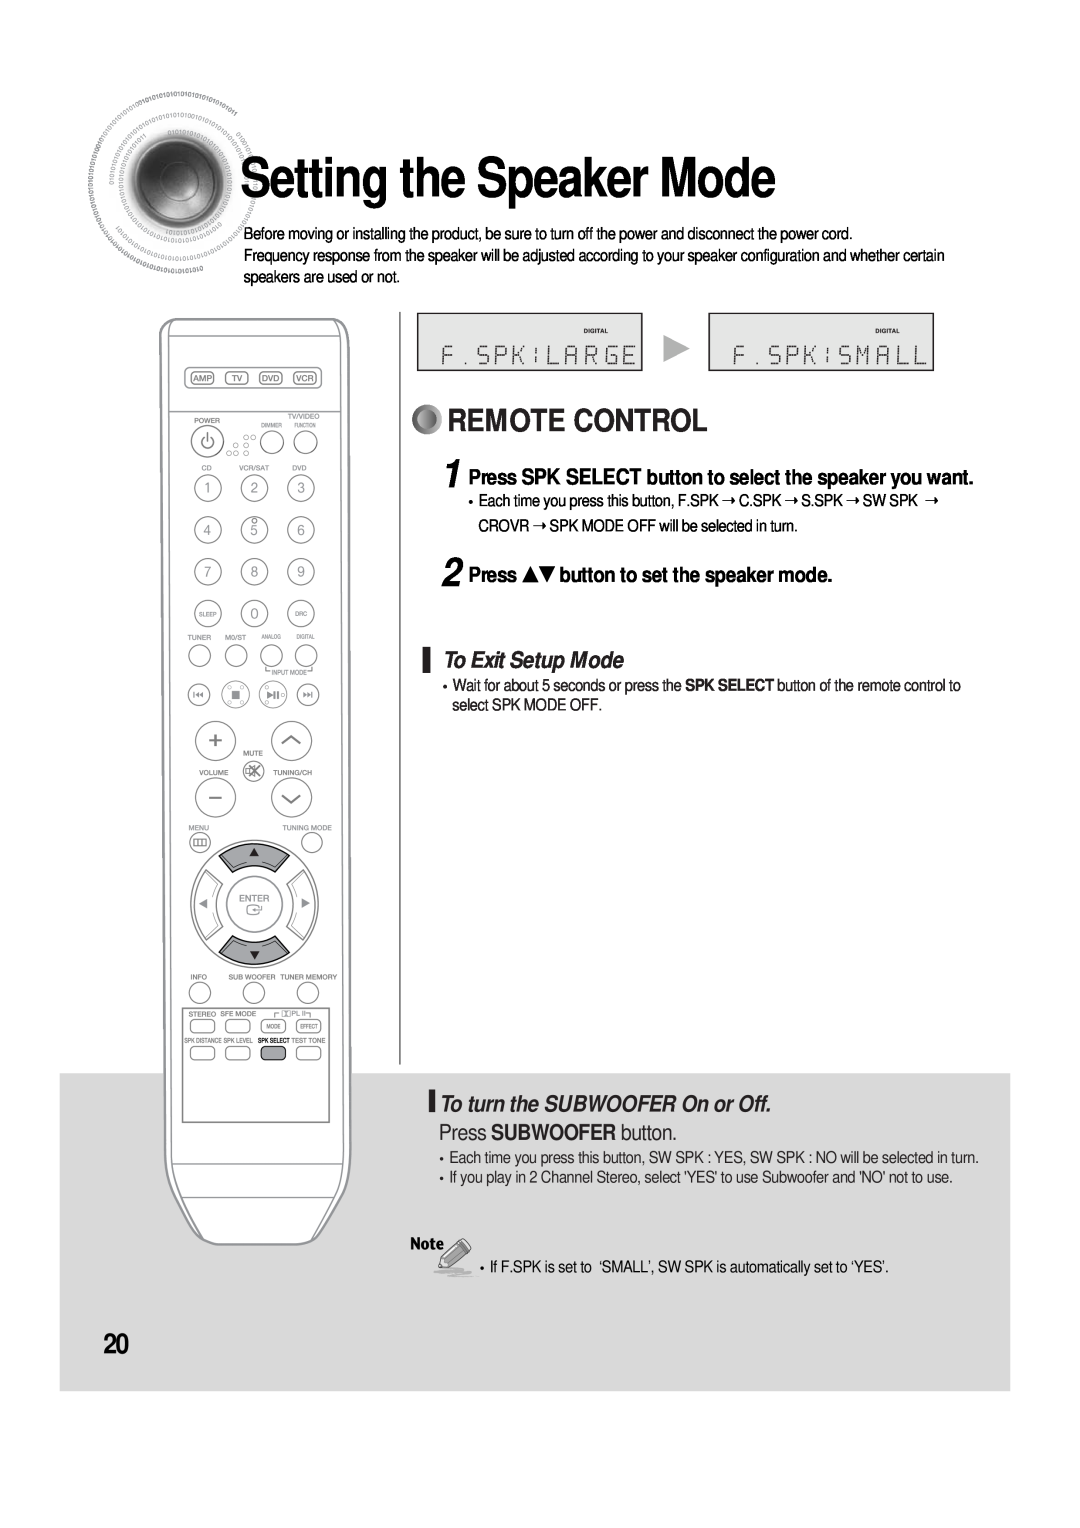 Samsung 20060510083254531 Settingthe Speaker Mode, Remote Control, To Exit Setup Mode, To turn the SUBWOOFER On or Off 